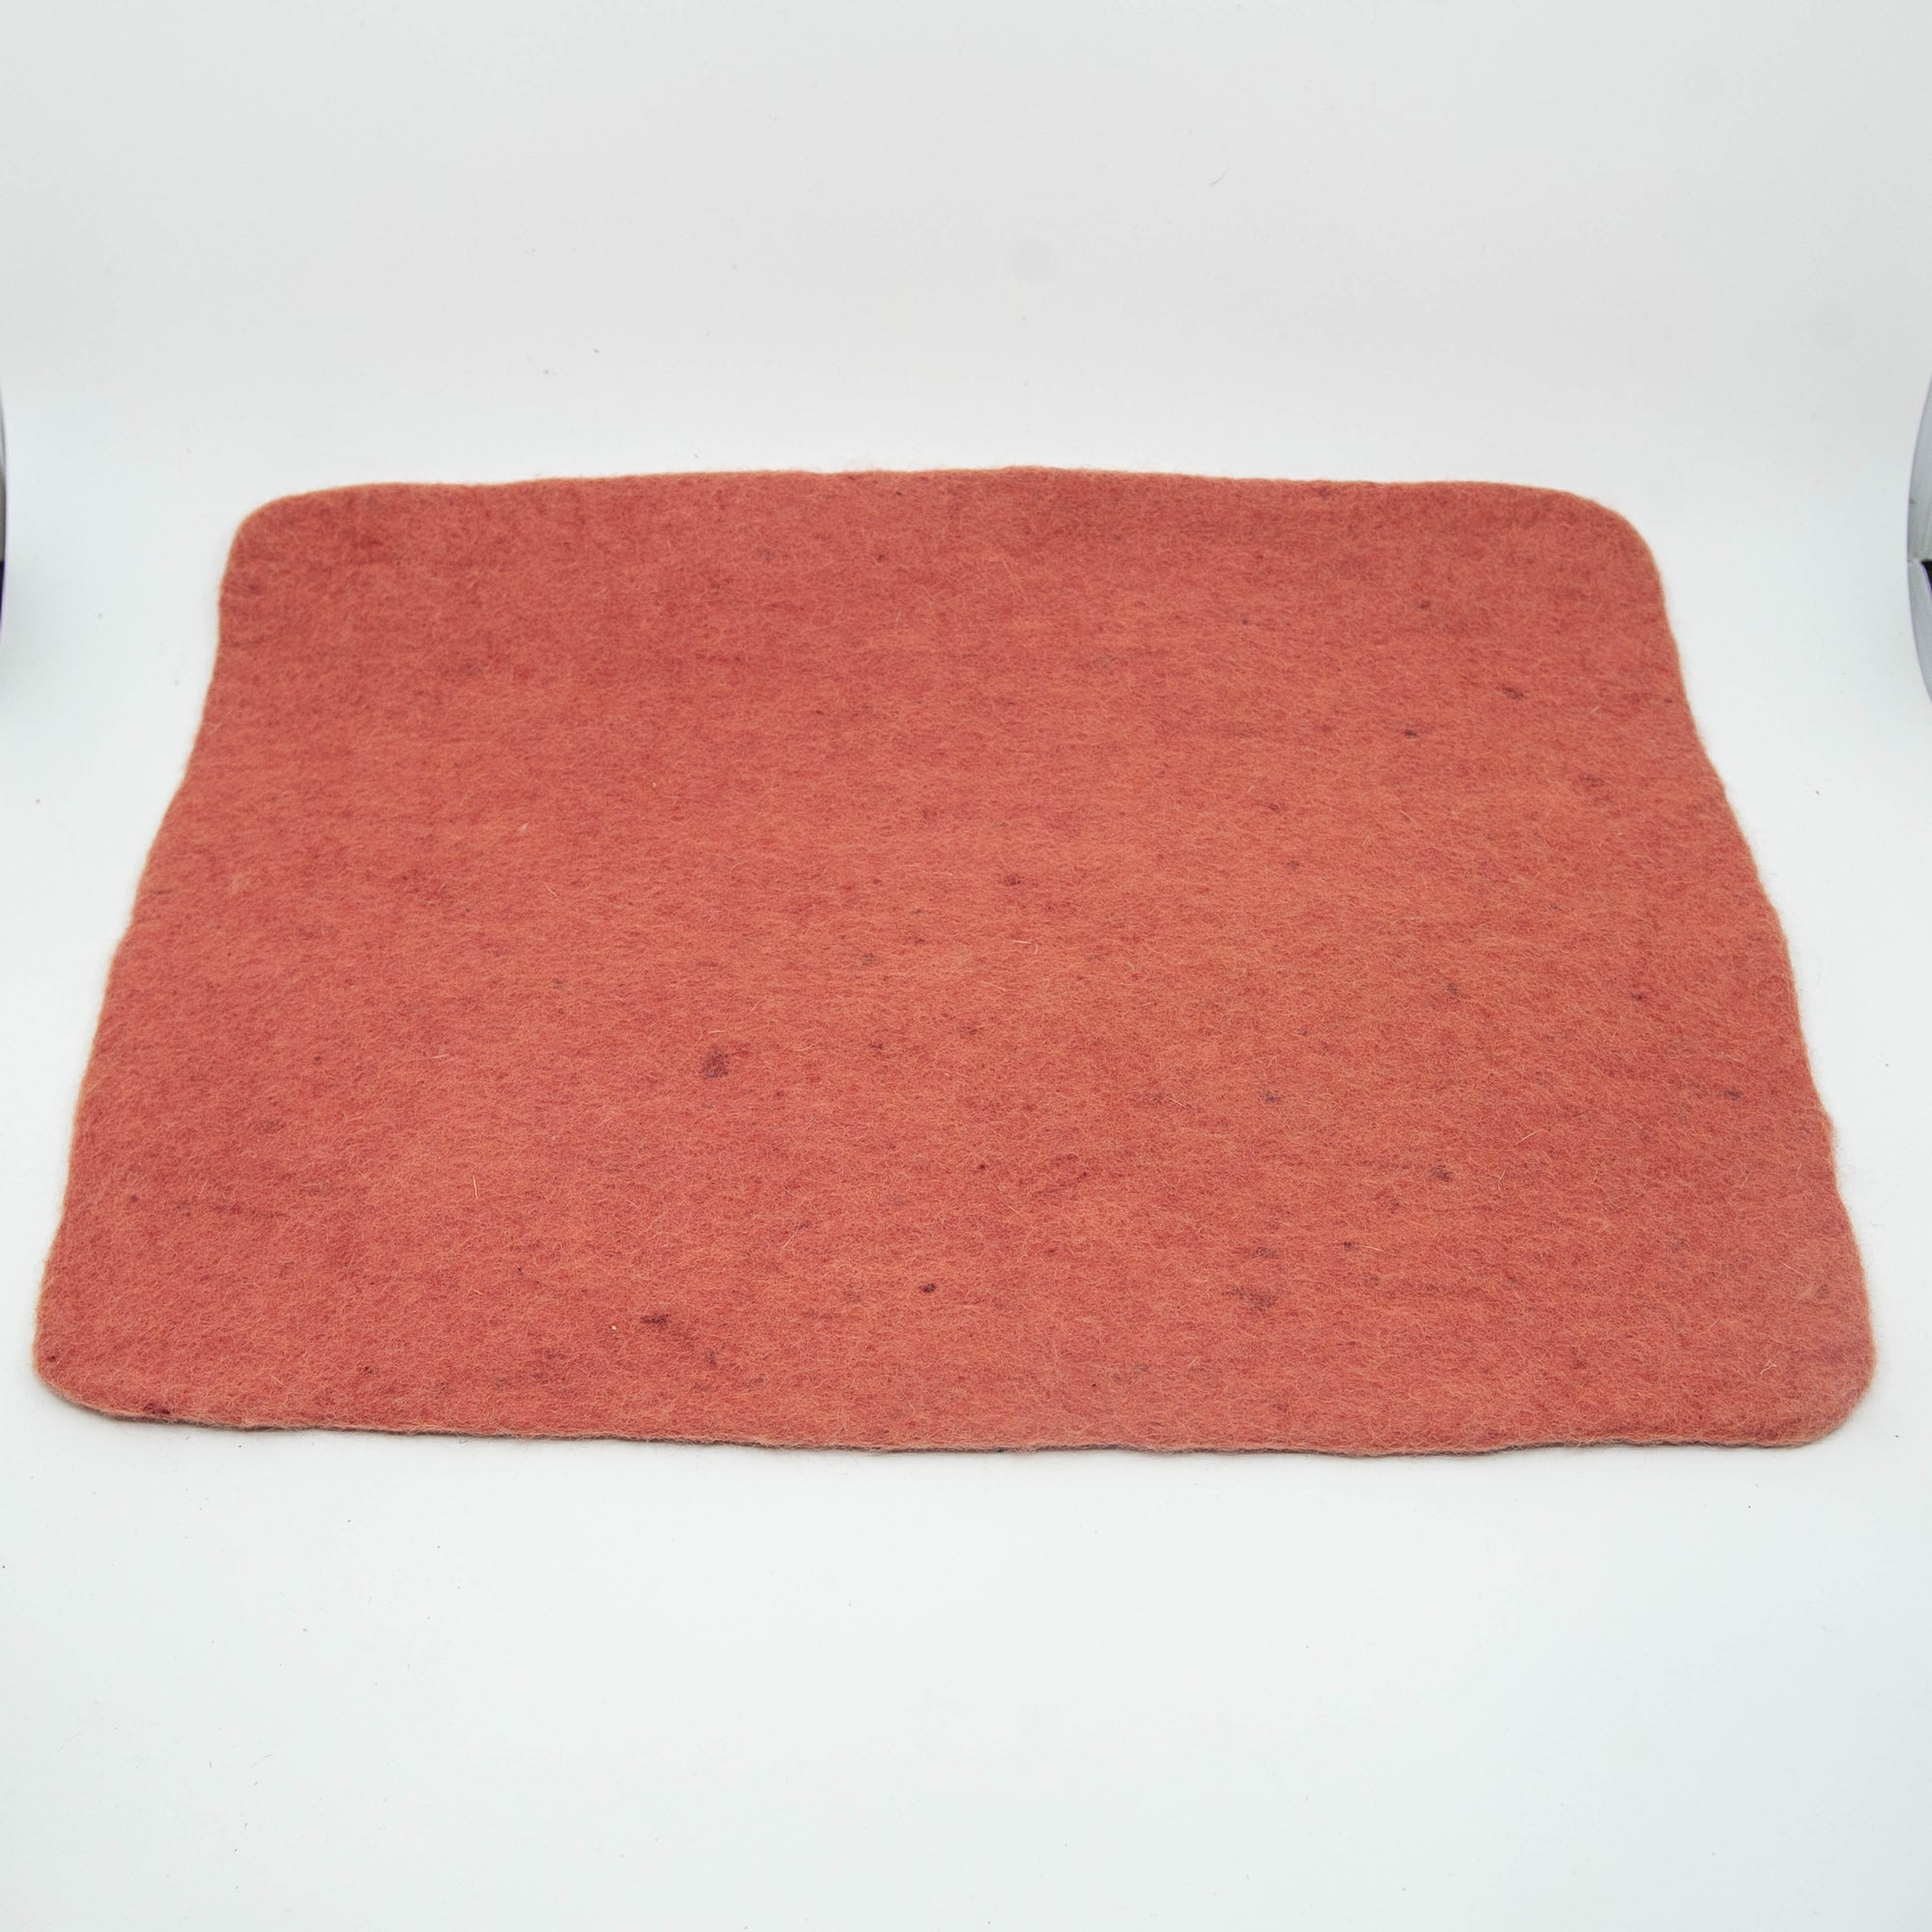 Nepalese Felt Rectangle Placemat - Dusty Rose